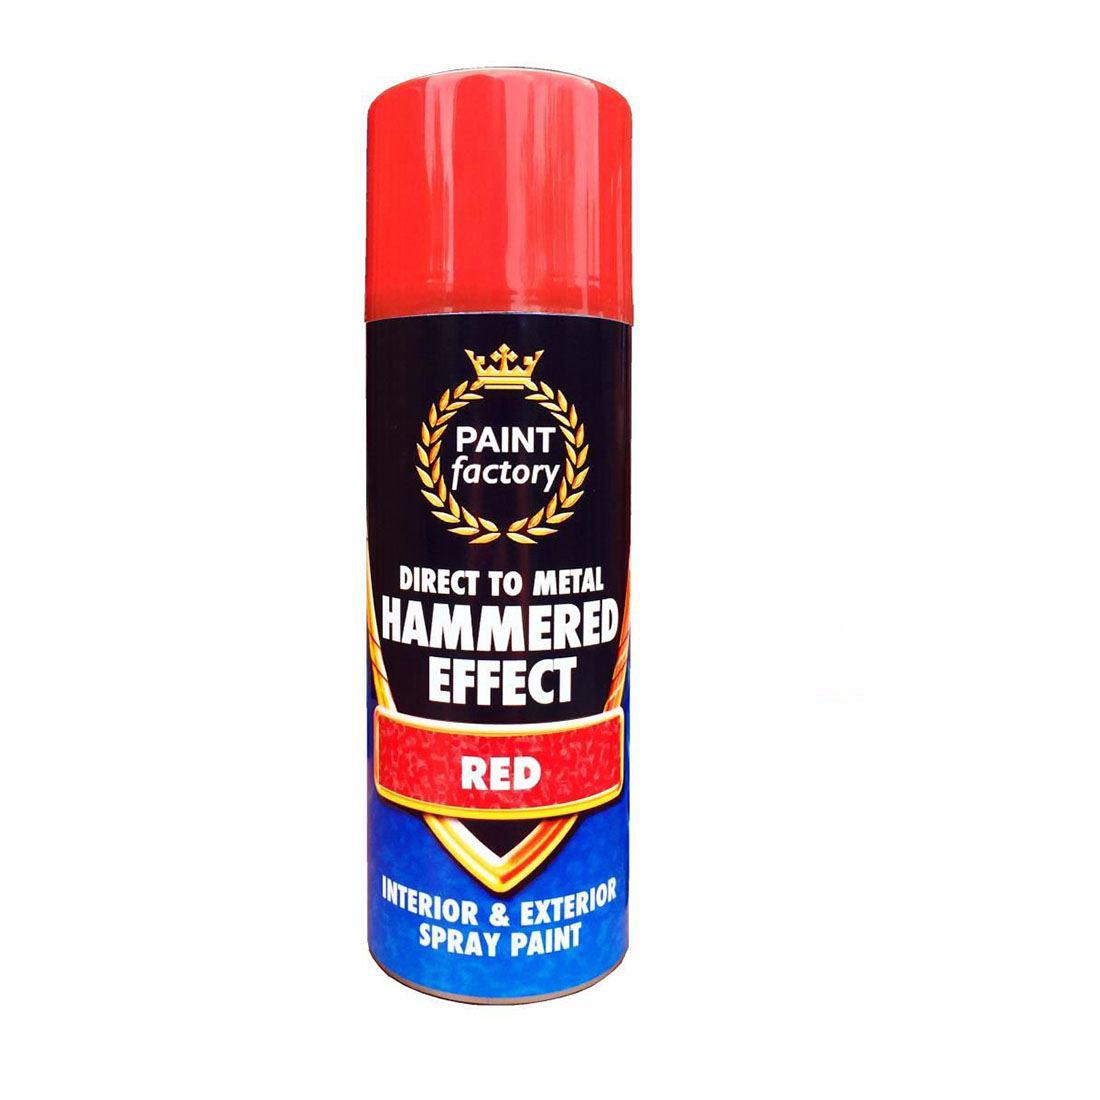 Hammered Red Spray Paint 400ml - Paint Factory